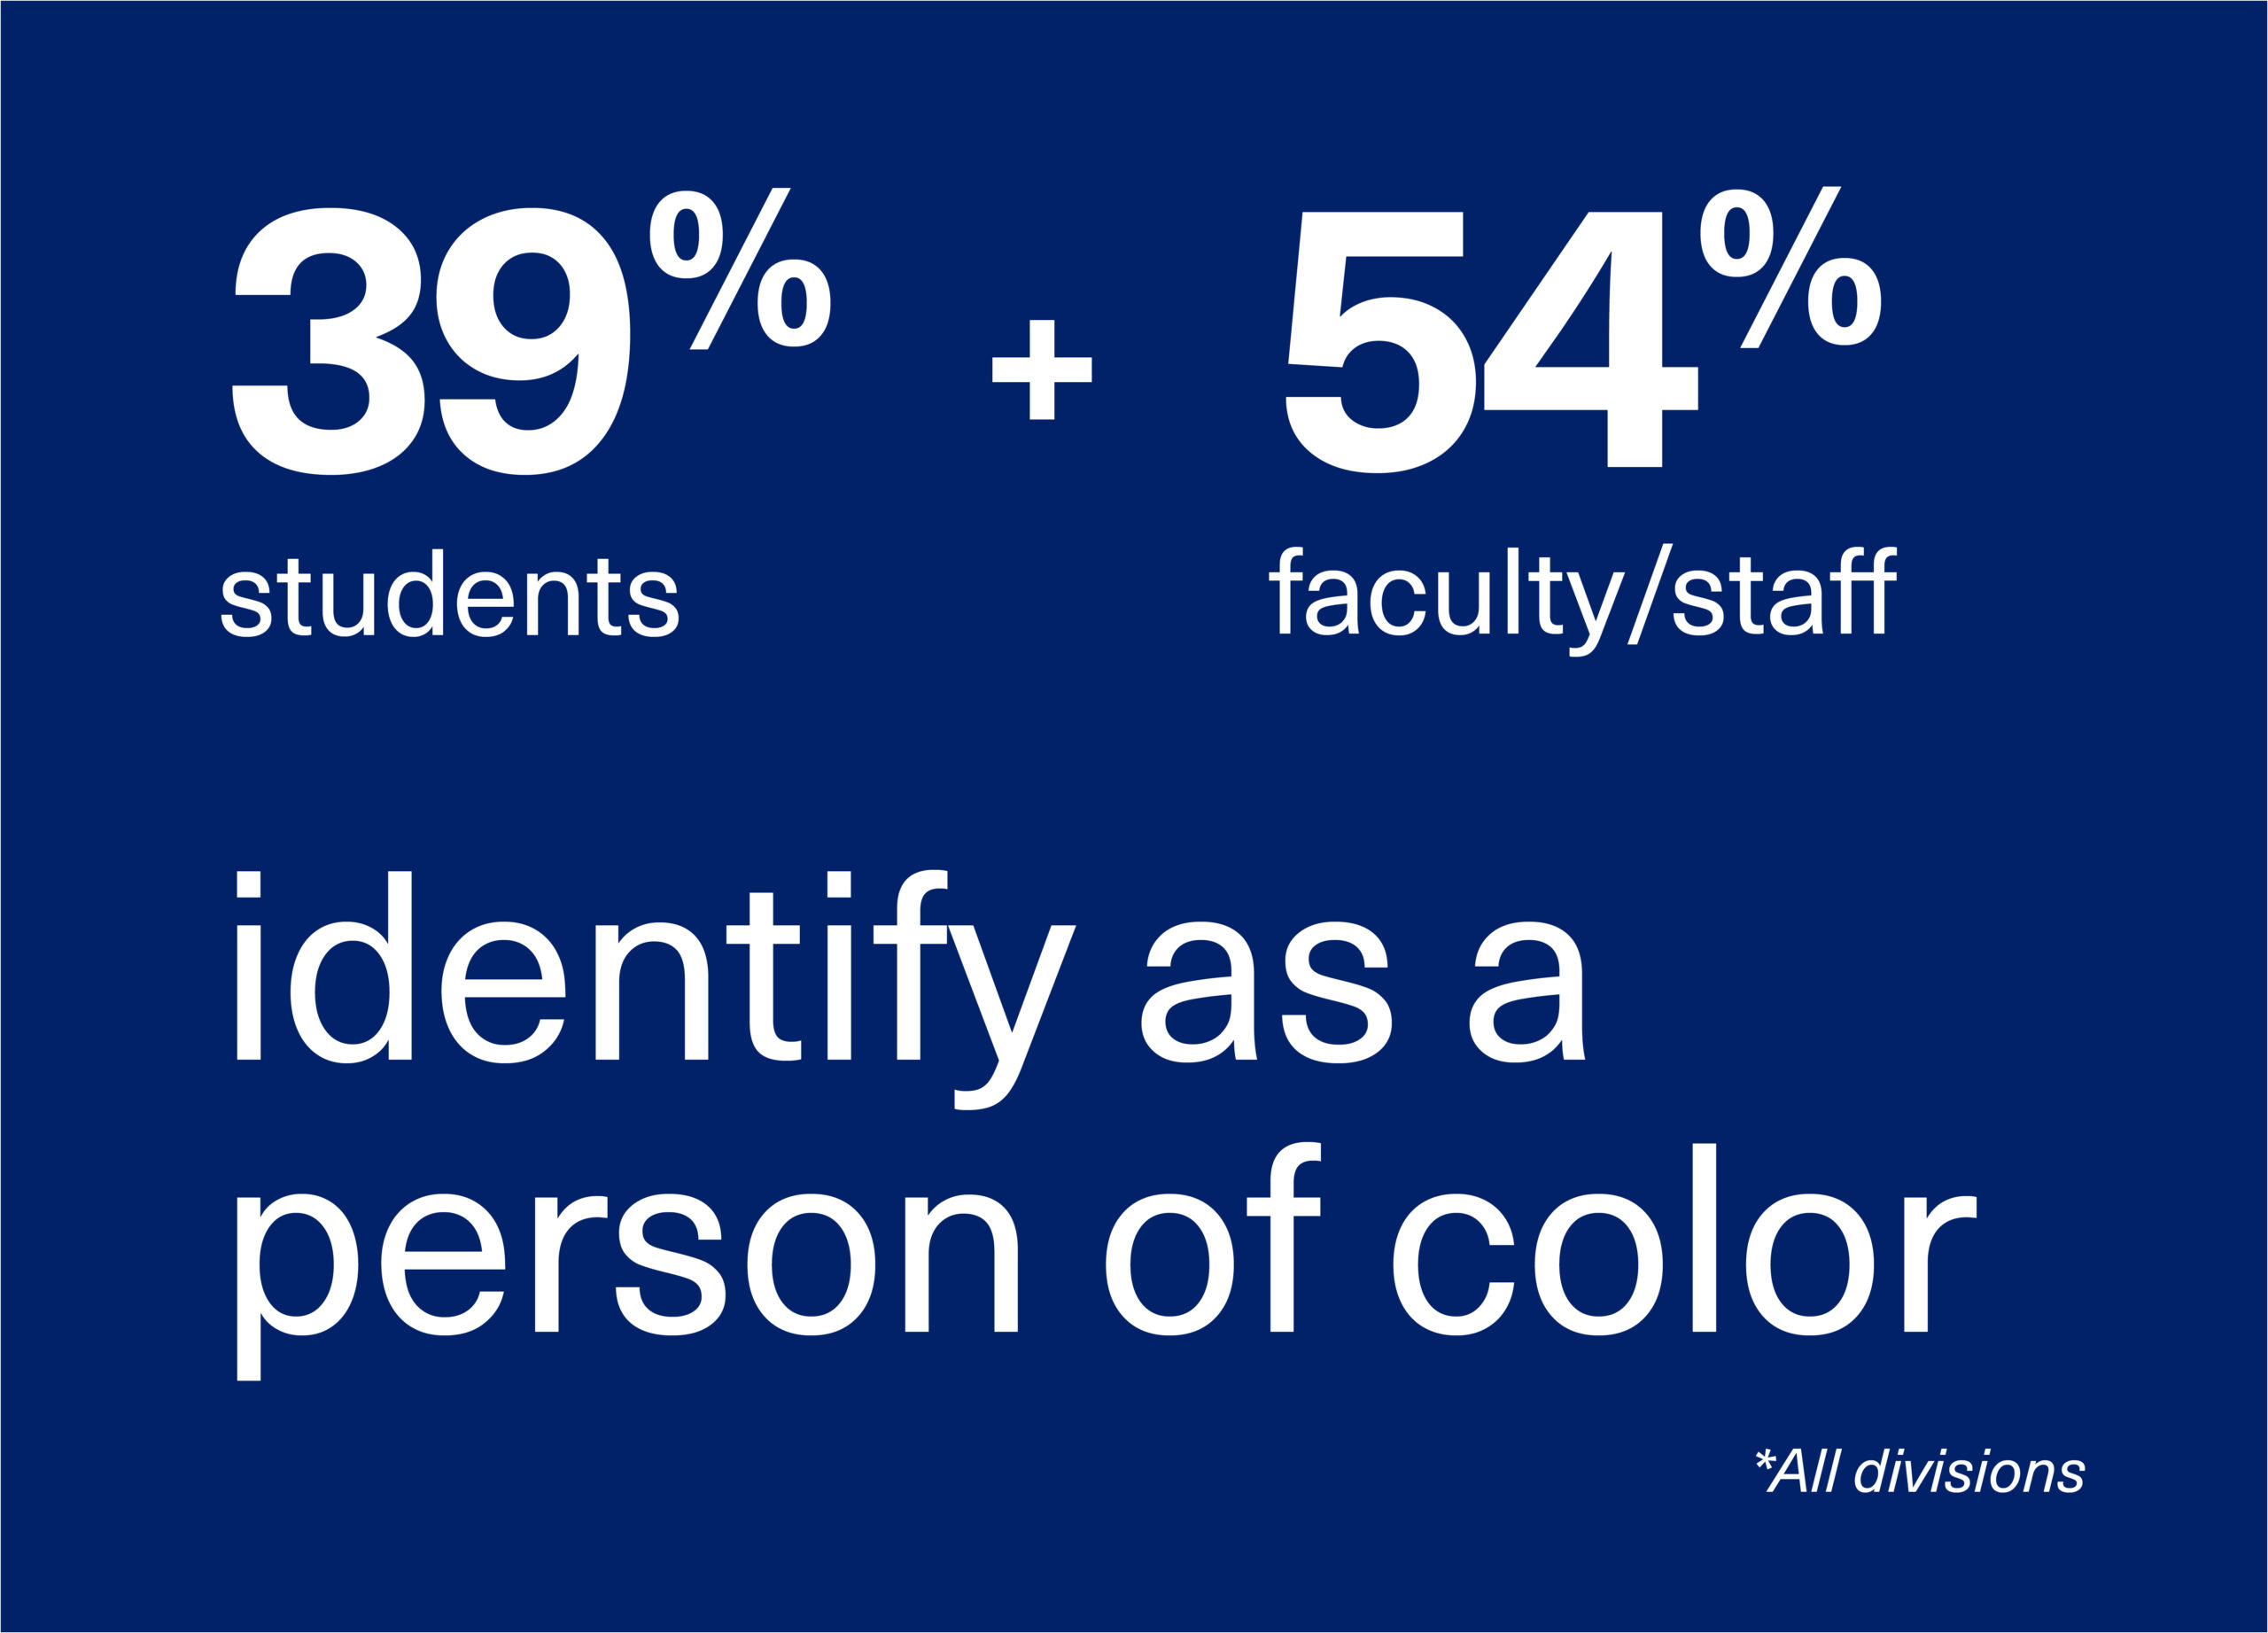 Ethical Culture Fieldston School ECFS By the numbers slide people of color